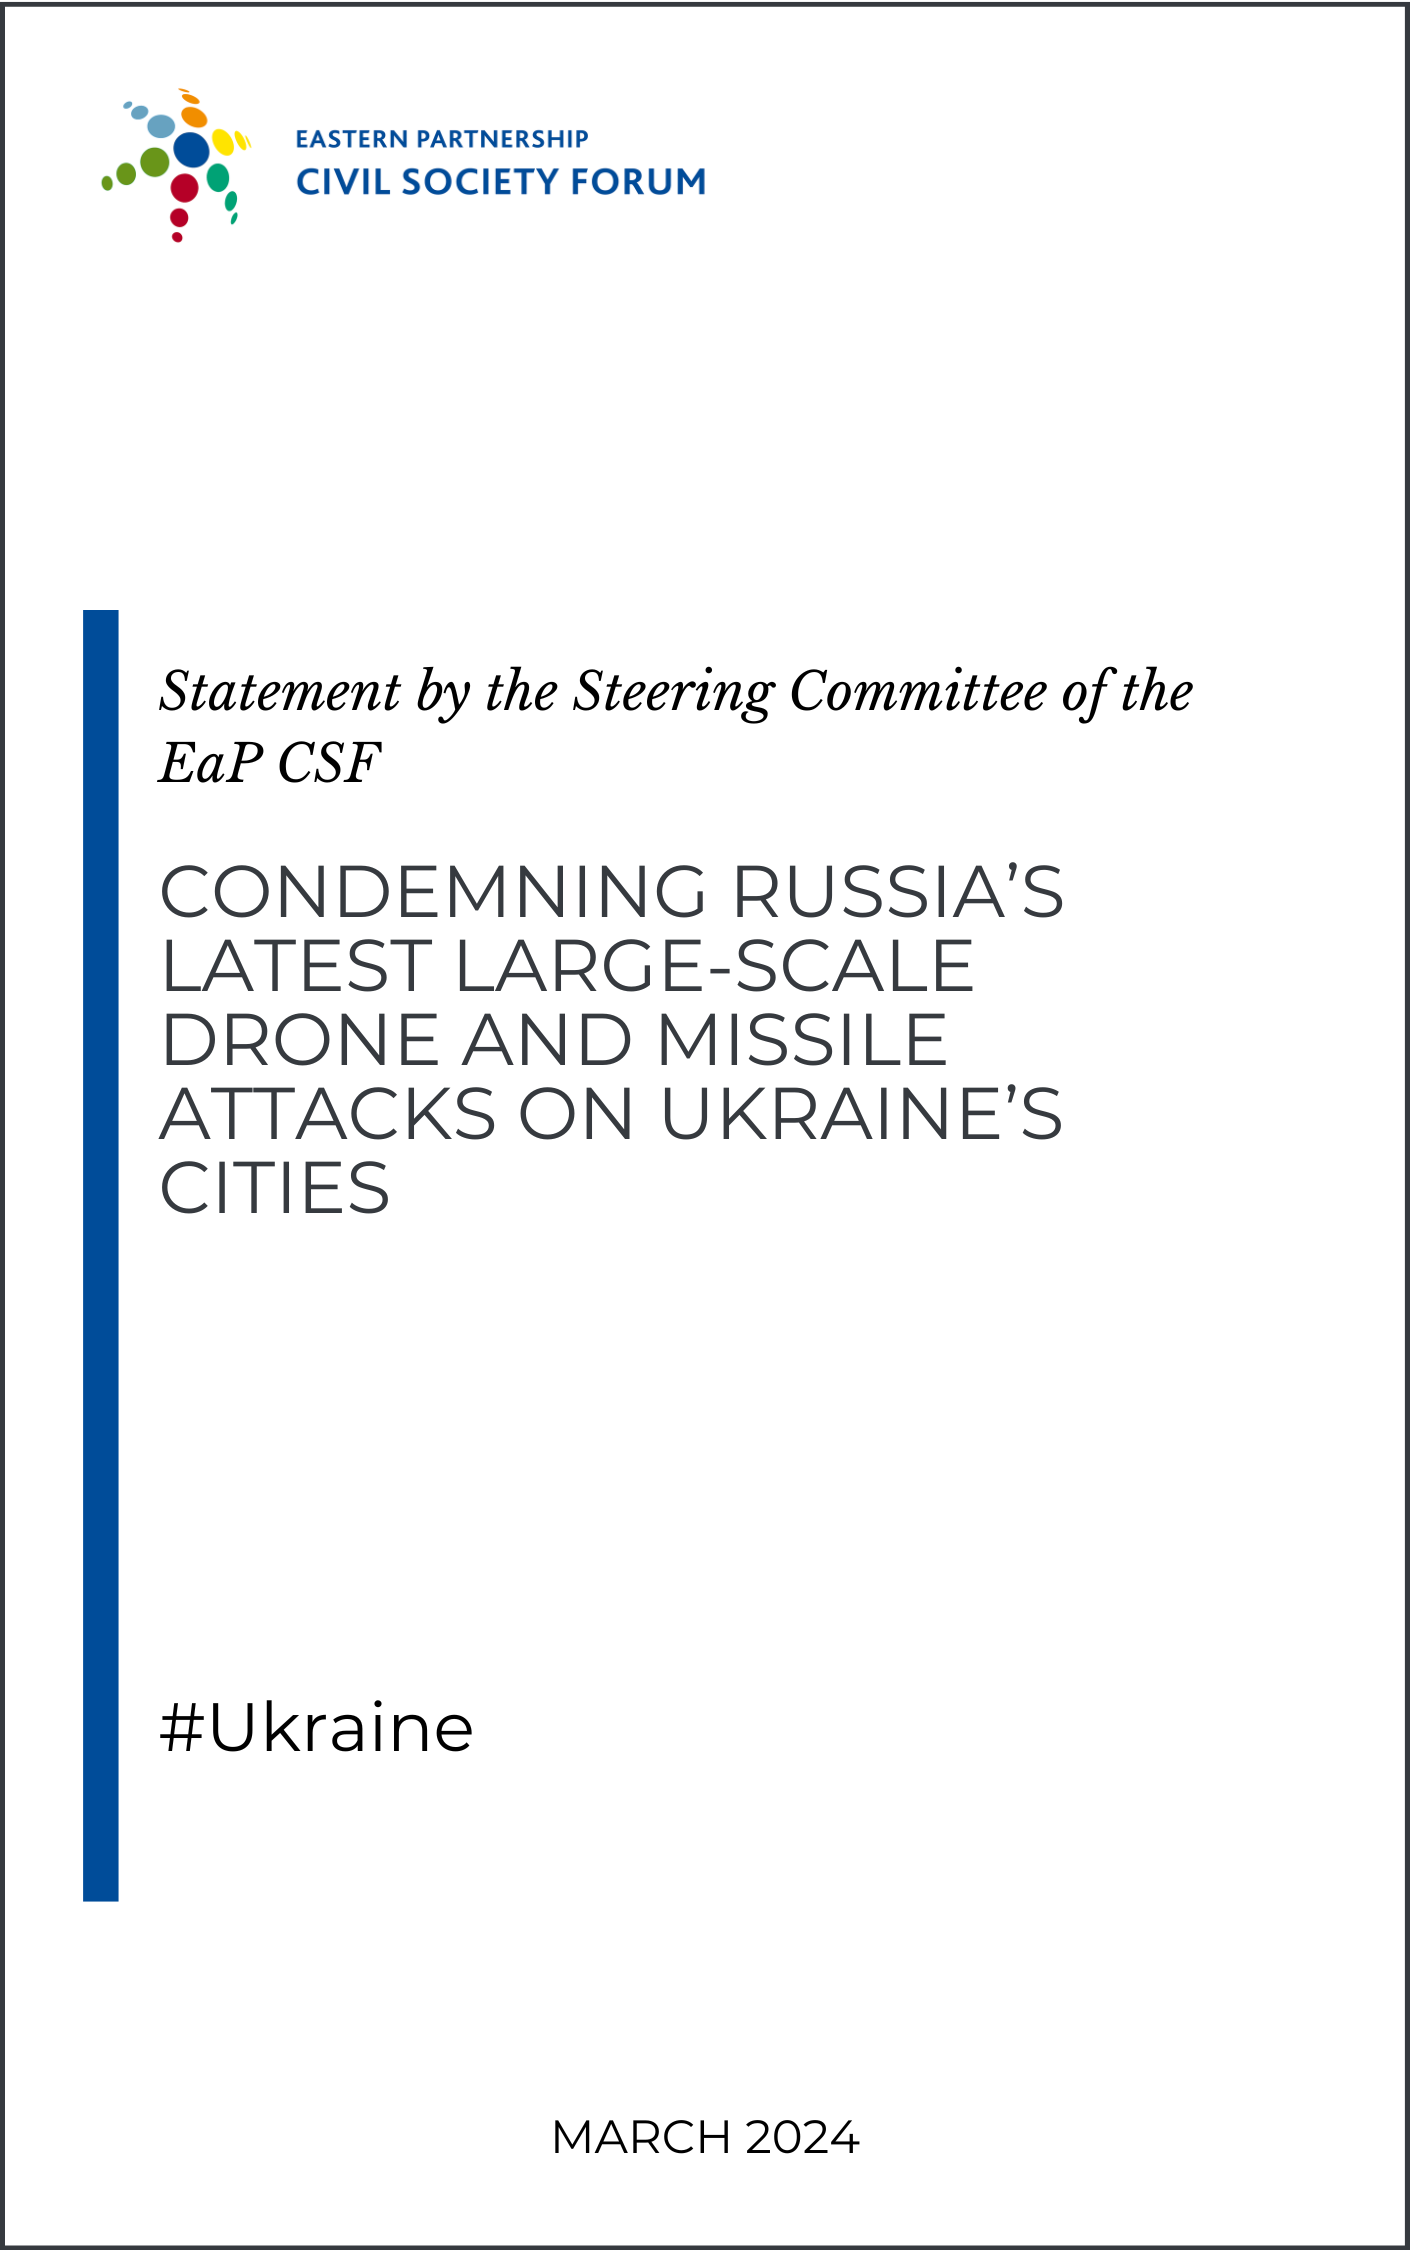 STATEMENT BY THE EAP CSF STEERING COMMITTEE CONDEMNING RUSSIA’S LATEST  LARGE-SCALE DRONE AND MISSILE ATTACKS ON UKRAINE’S CITIES